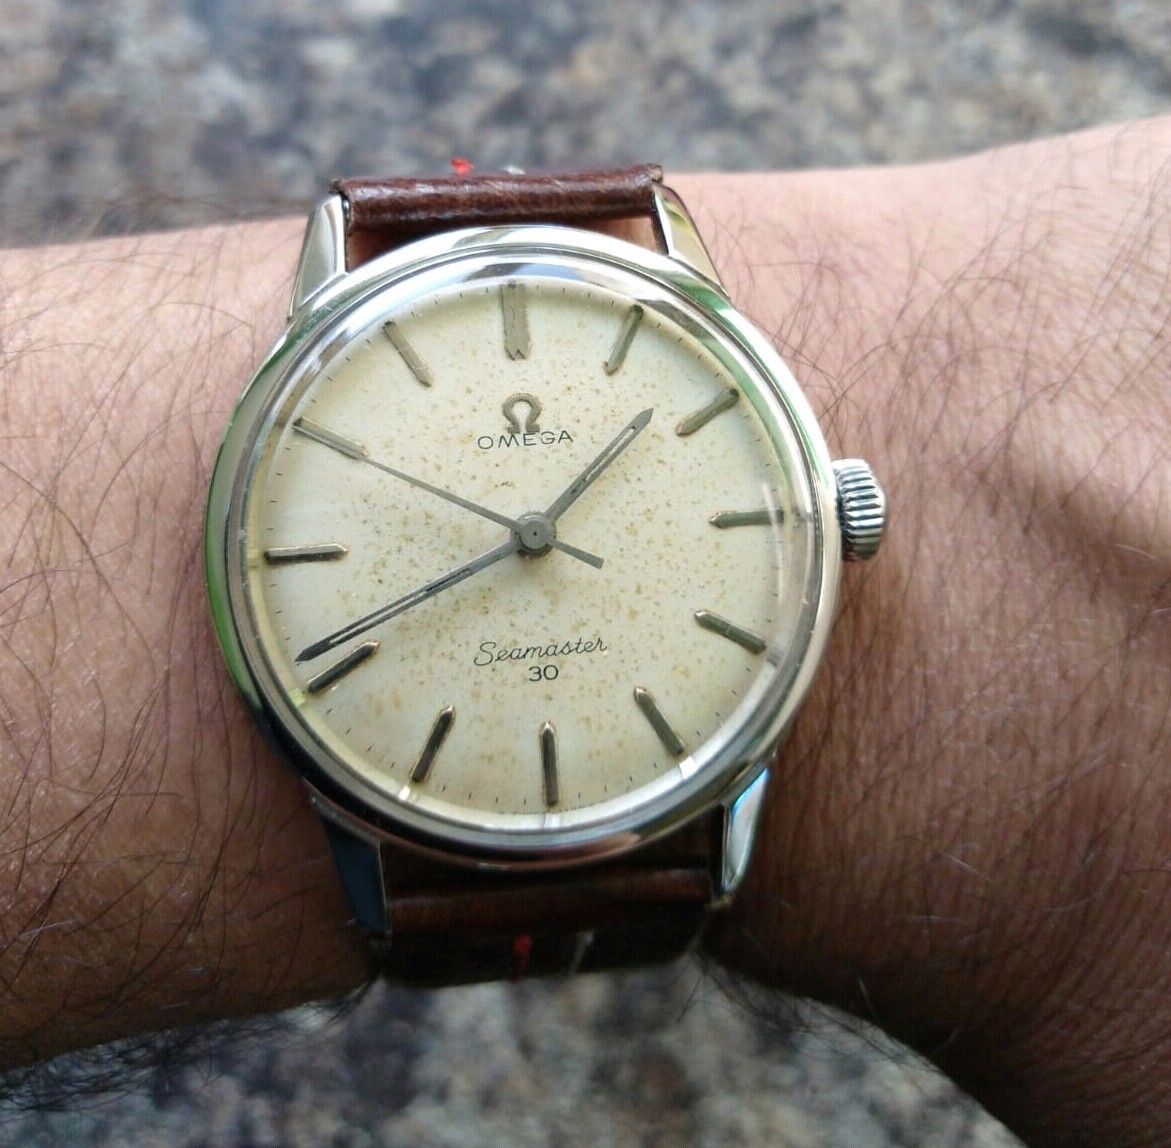 buy vintage omega watches